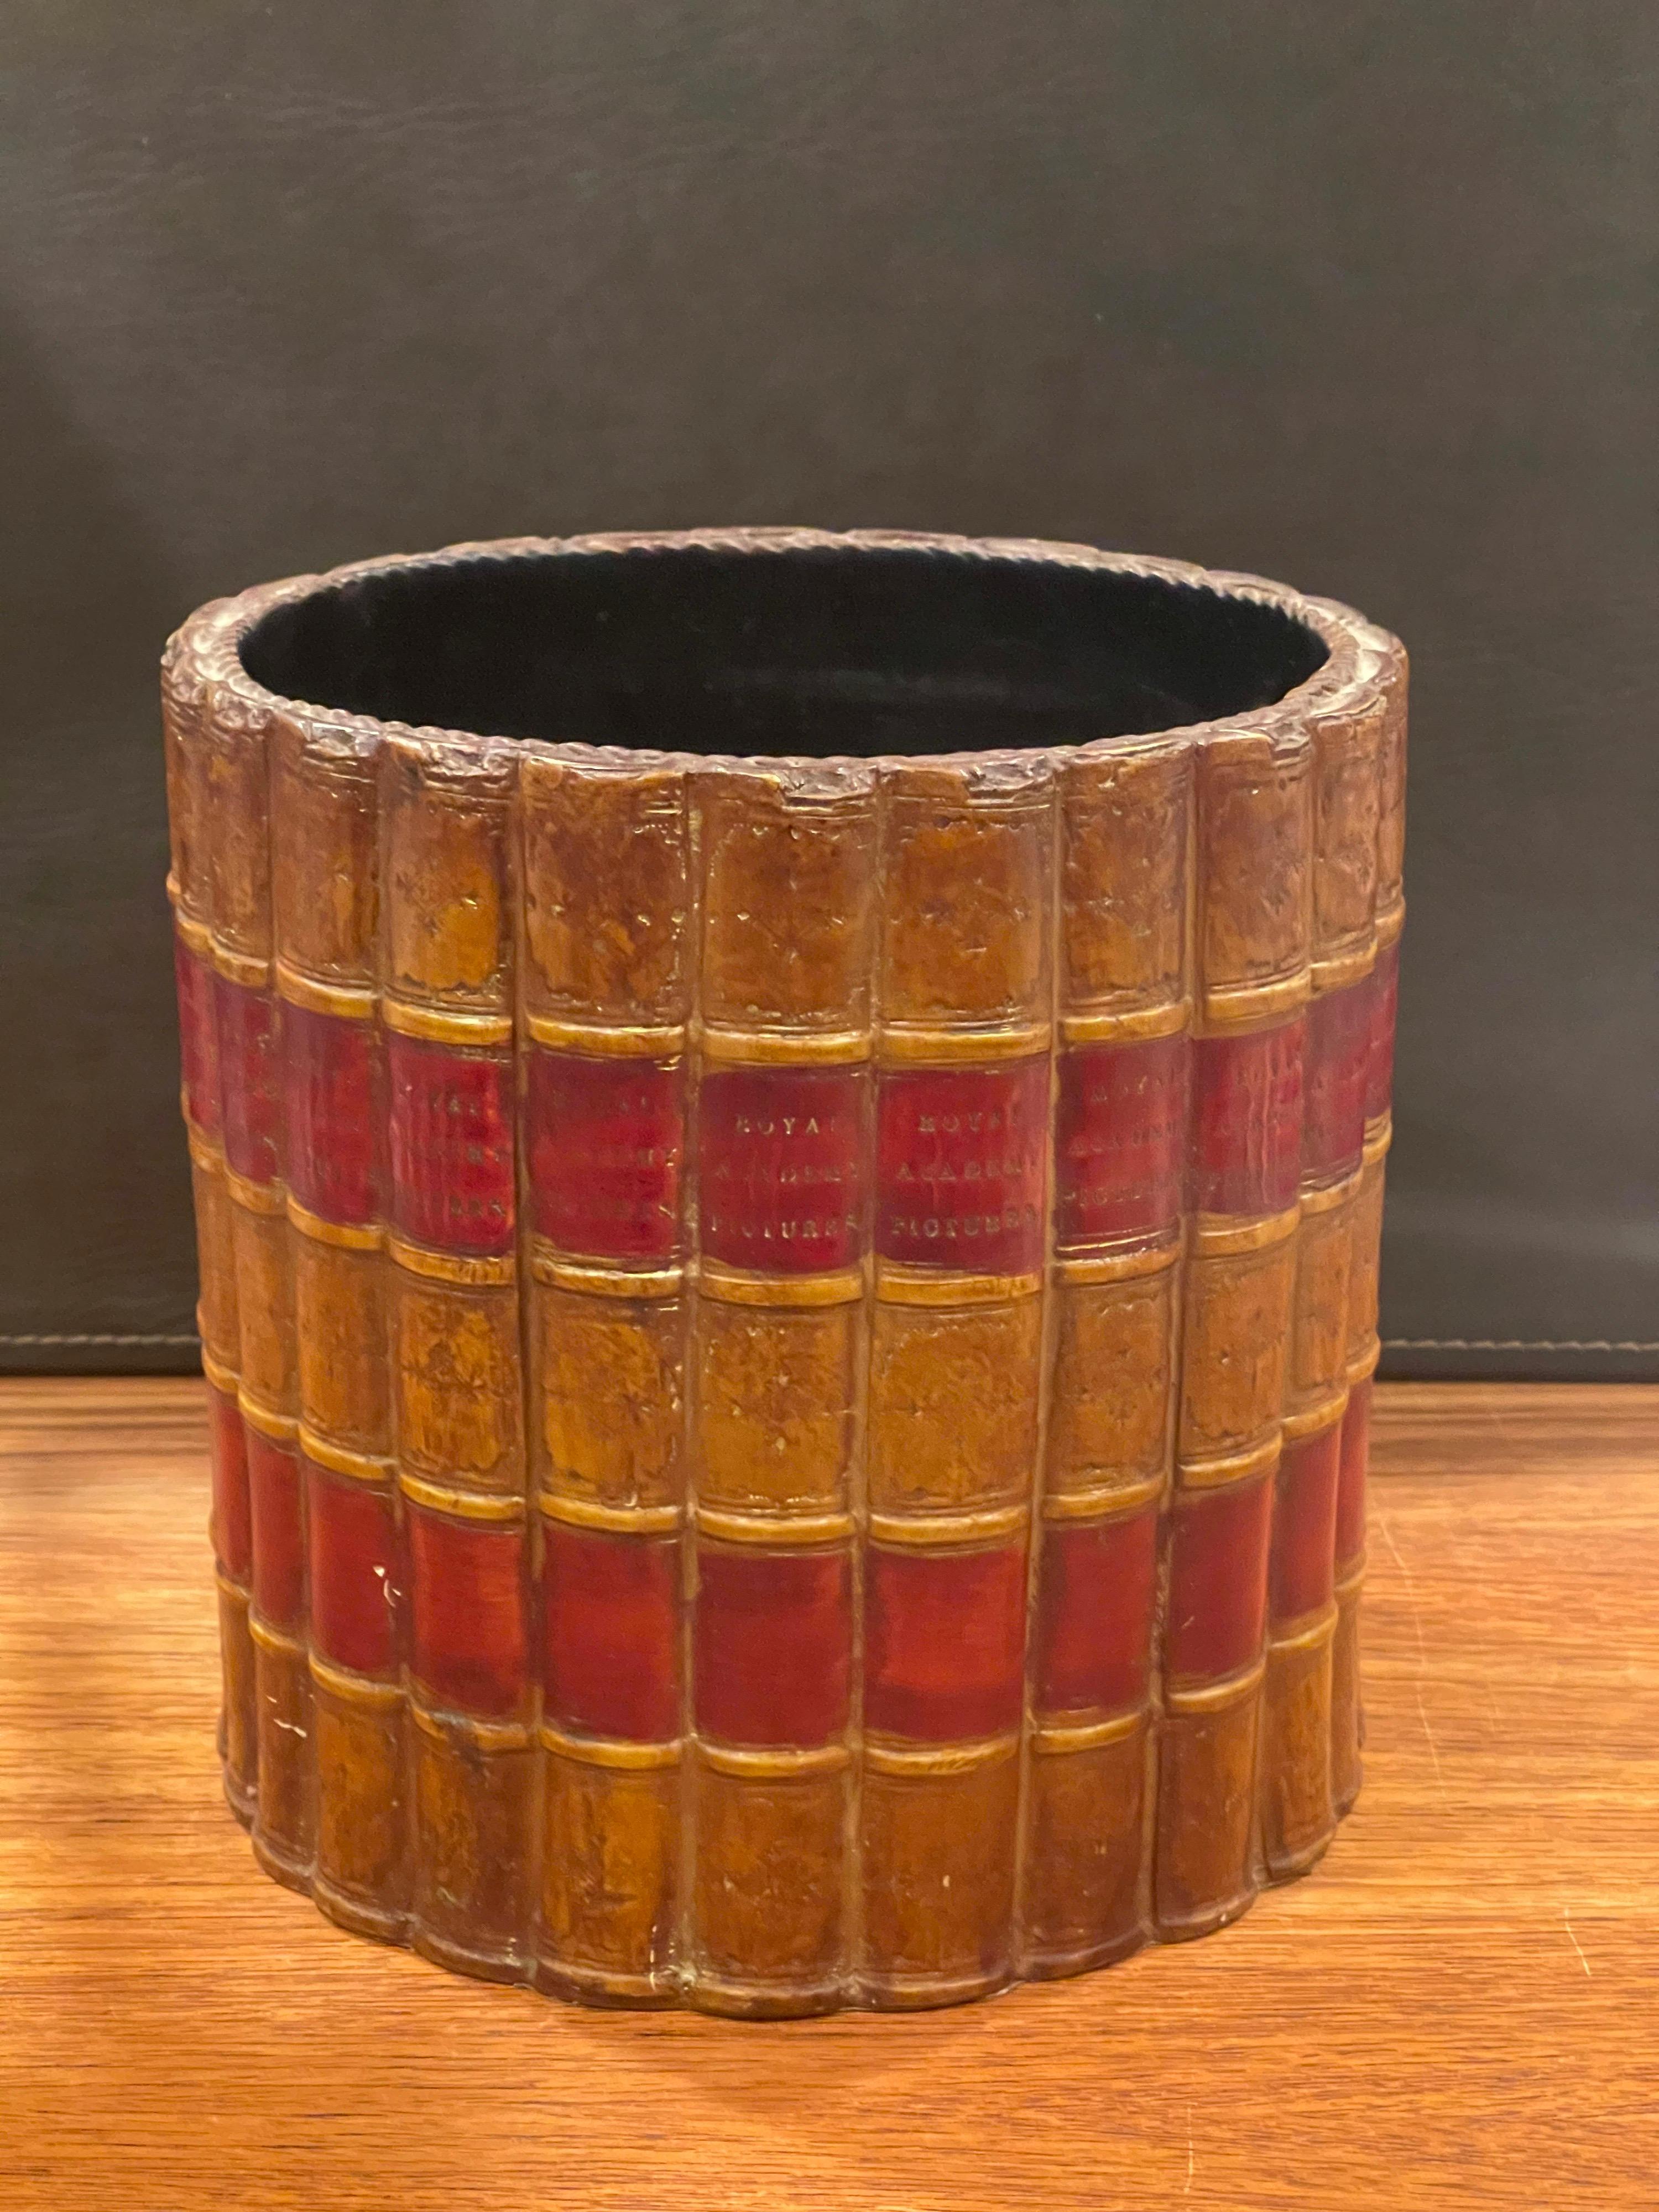 A stylish Edwardian inspired waste basket with faux book spines entitled 